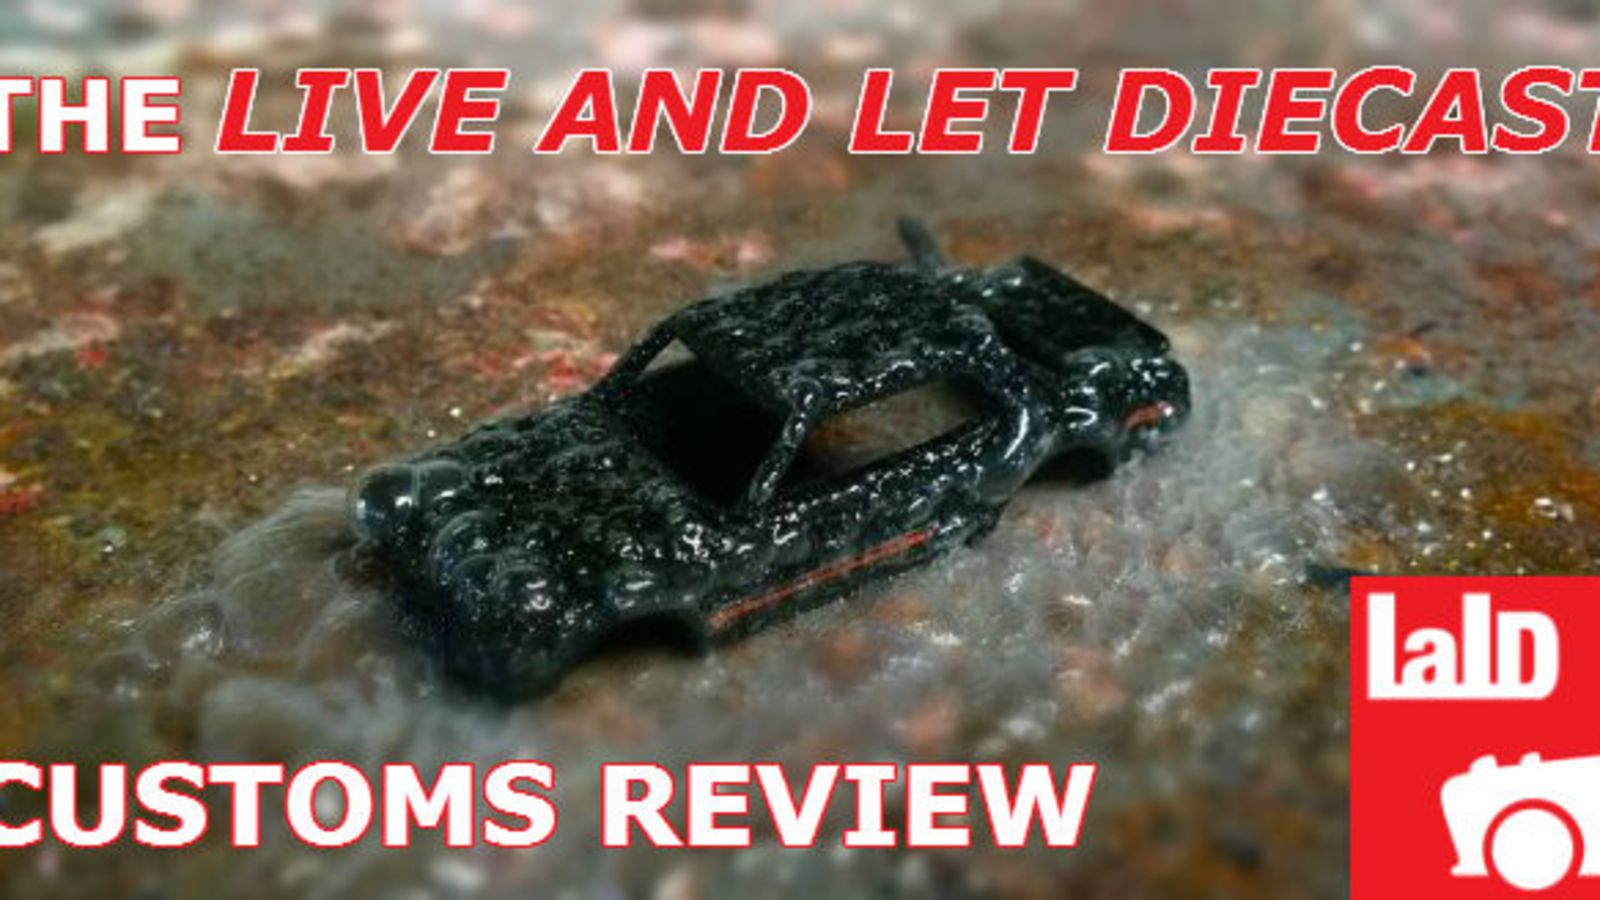 Illustration for article titled The Live and Let Die-Cast Customs Review - 9/30 - 10/7/2014